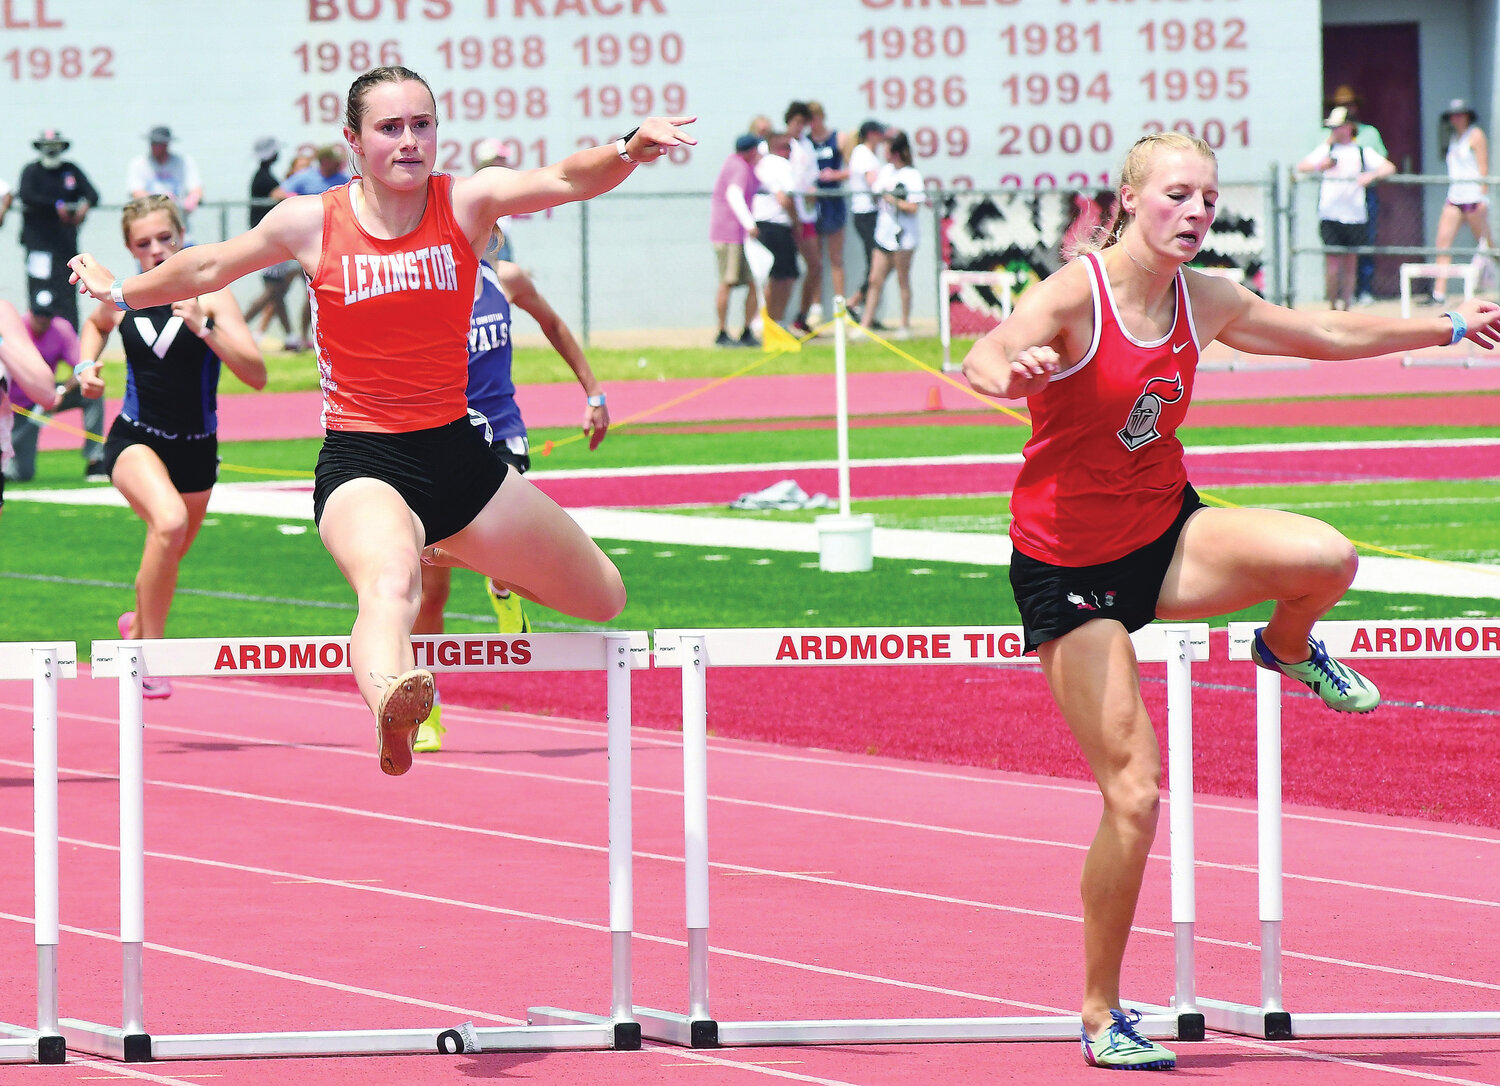 Lexington senior Janelle Winterton won State in the 300 meter hurdles for the third year in a row in Ardmore at the State meet. She ran the race in 44.82.